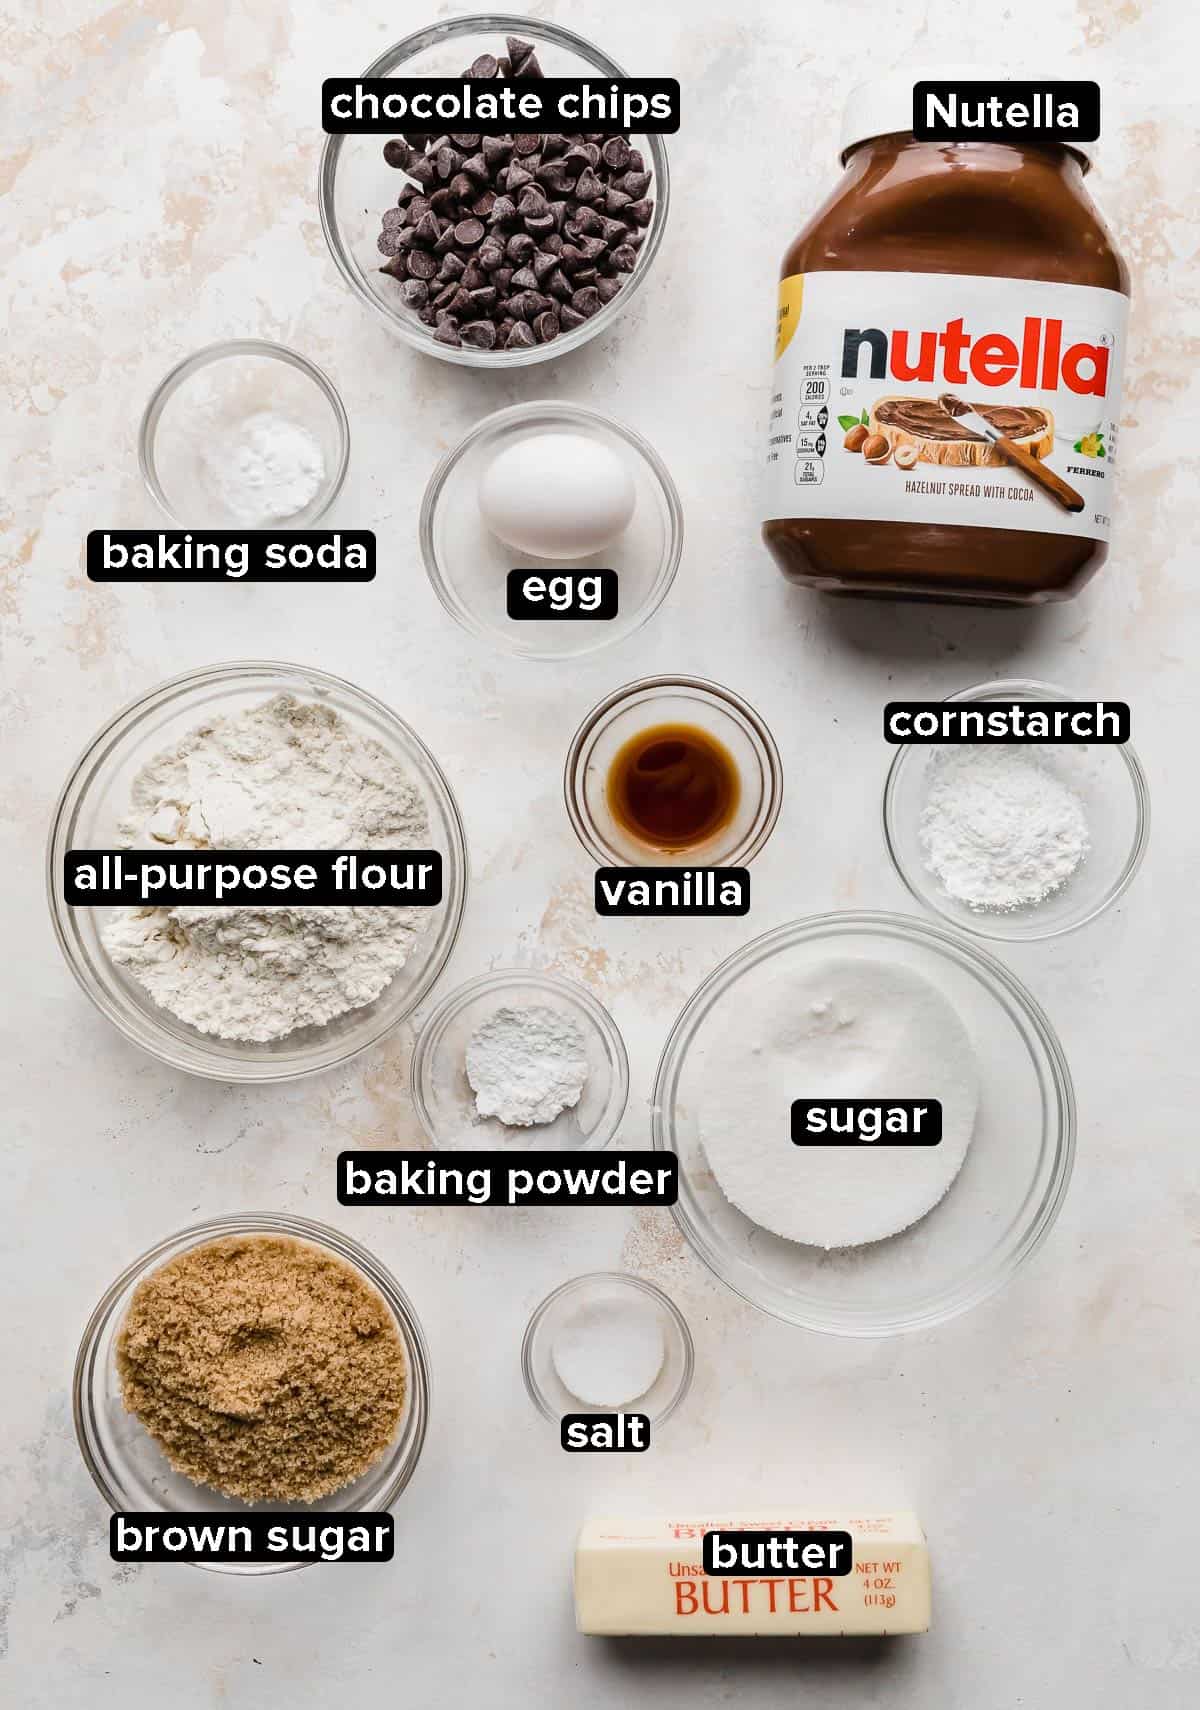 Ingredients used to make Nutella Stuffed Nutella Cookies portioned into glass bowls on a white background.